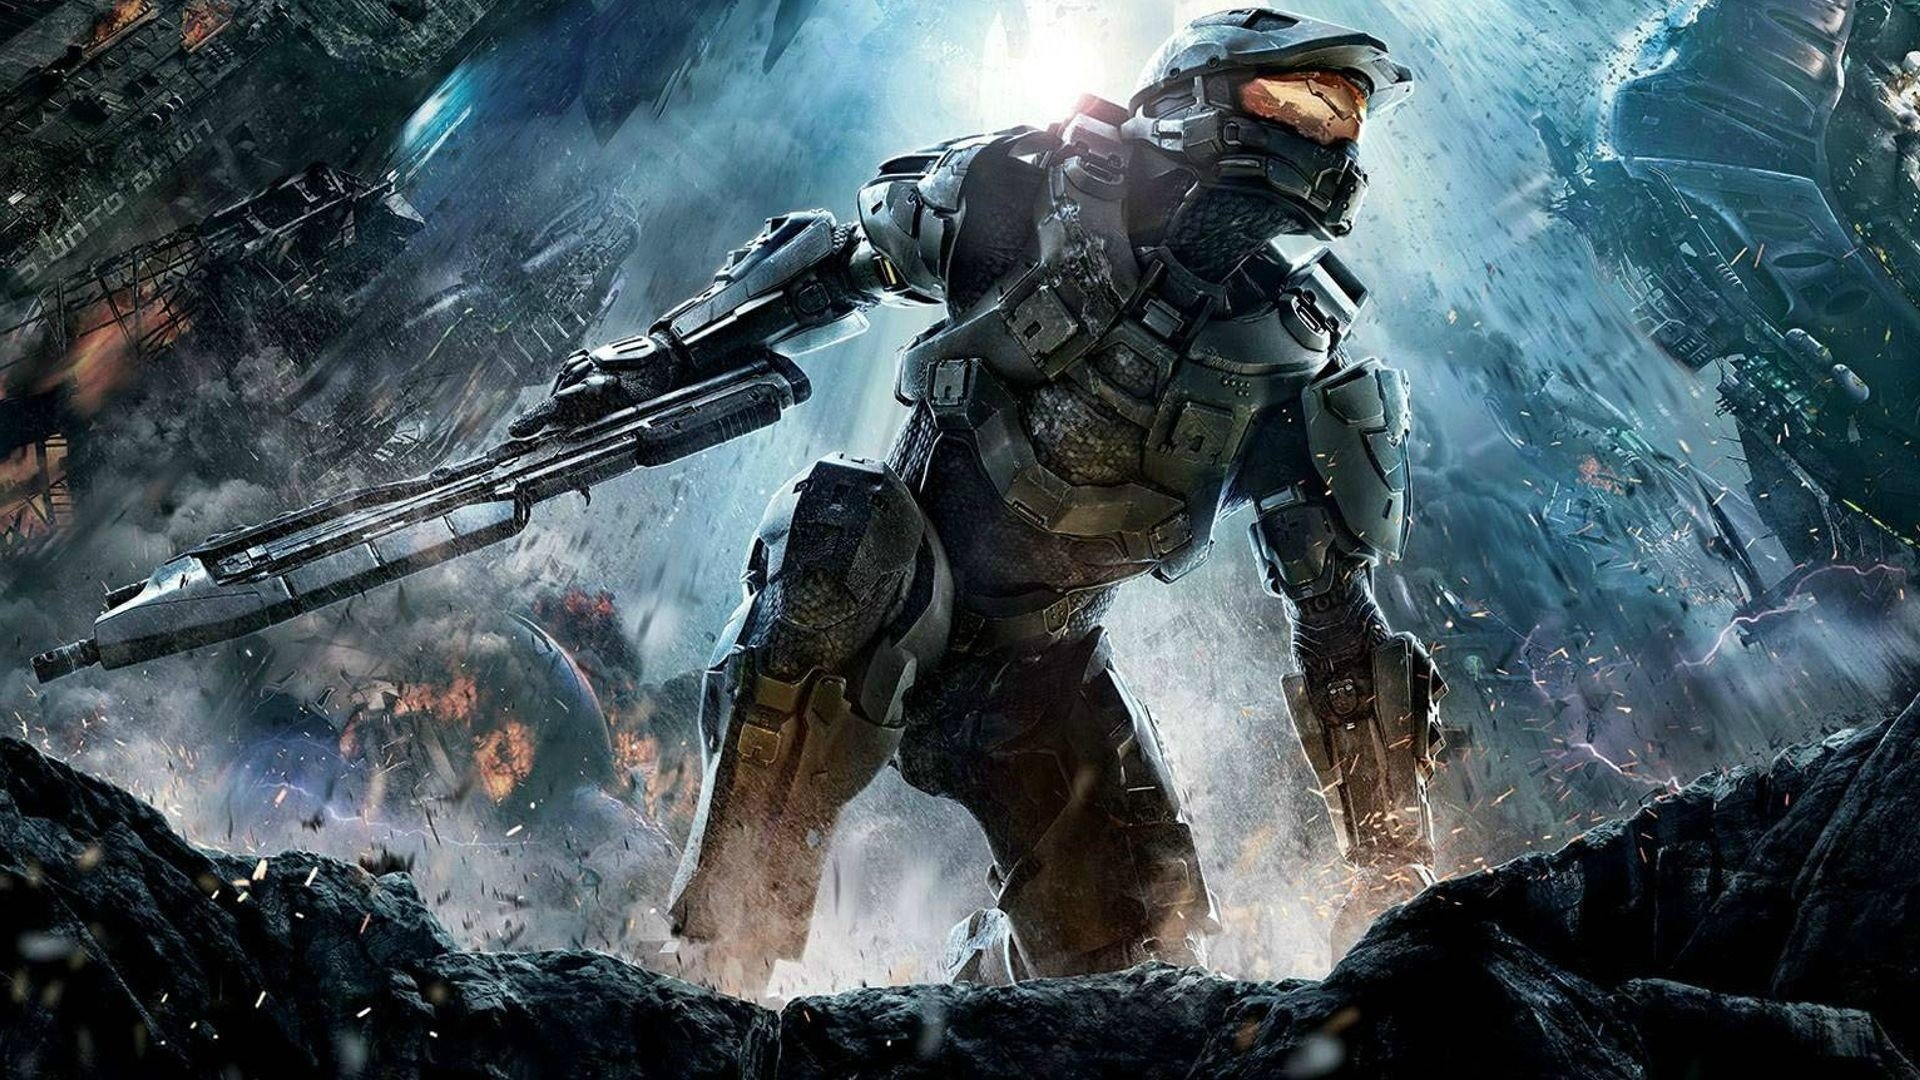 Xbox, Xbox One, Xbox 360, Halo, Halo 4, Master Chief, Suits, Space suit, Halo: Master Chief Collection Wallpaper